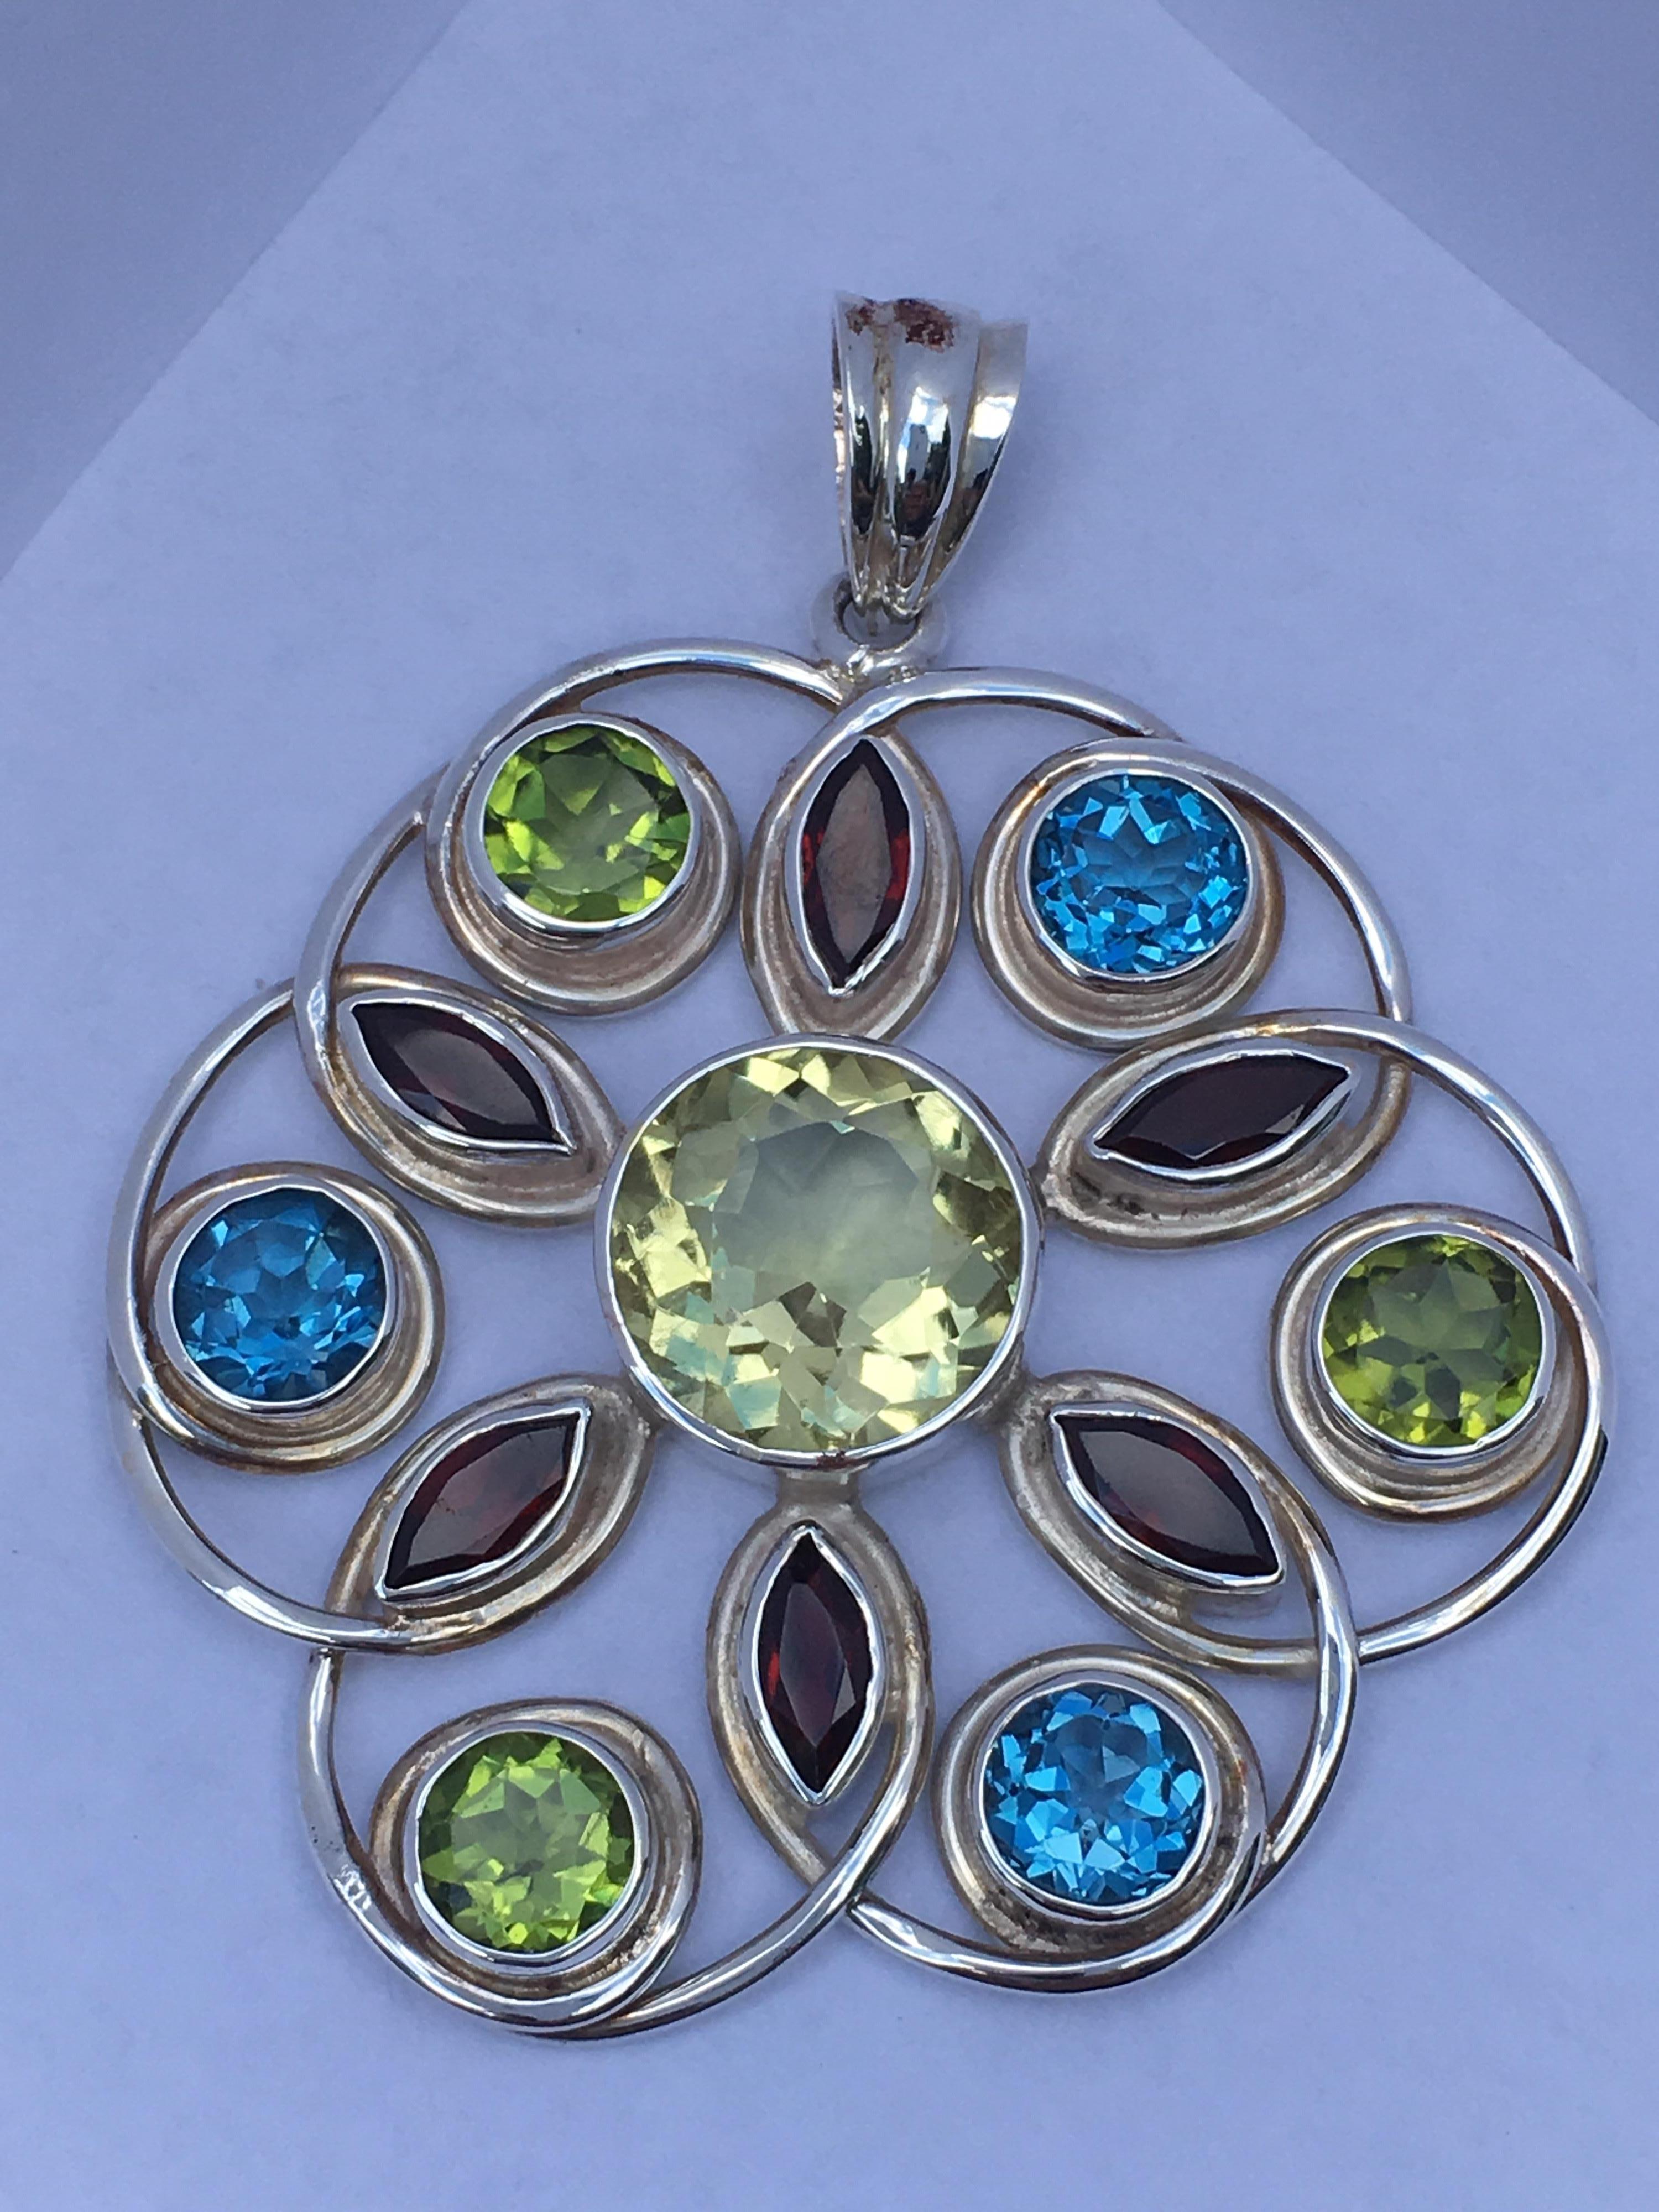 Round 13 MM Hand cut and polished Lemon Quartz , 7 MM Blue topaz and 7 MM Peridot with Marquise 
4 MM X 8 MM Garnet.
Pendant Measures about 50 MM Round.
Total Weight of Pendant is 20.35 Gram
You can wear on Silver chain or Leather band .